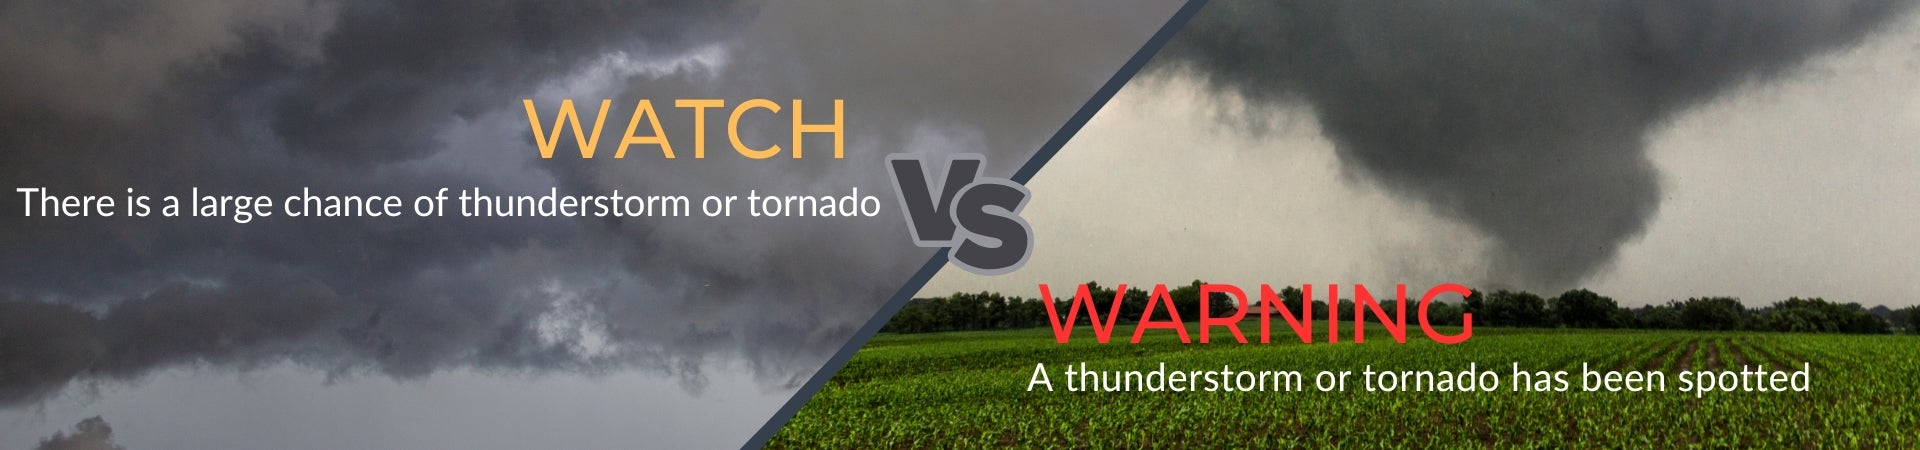 Know your severe weather terms